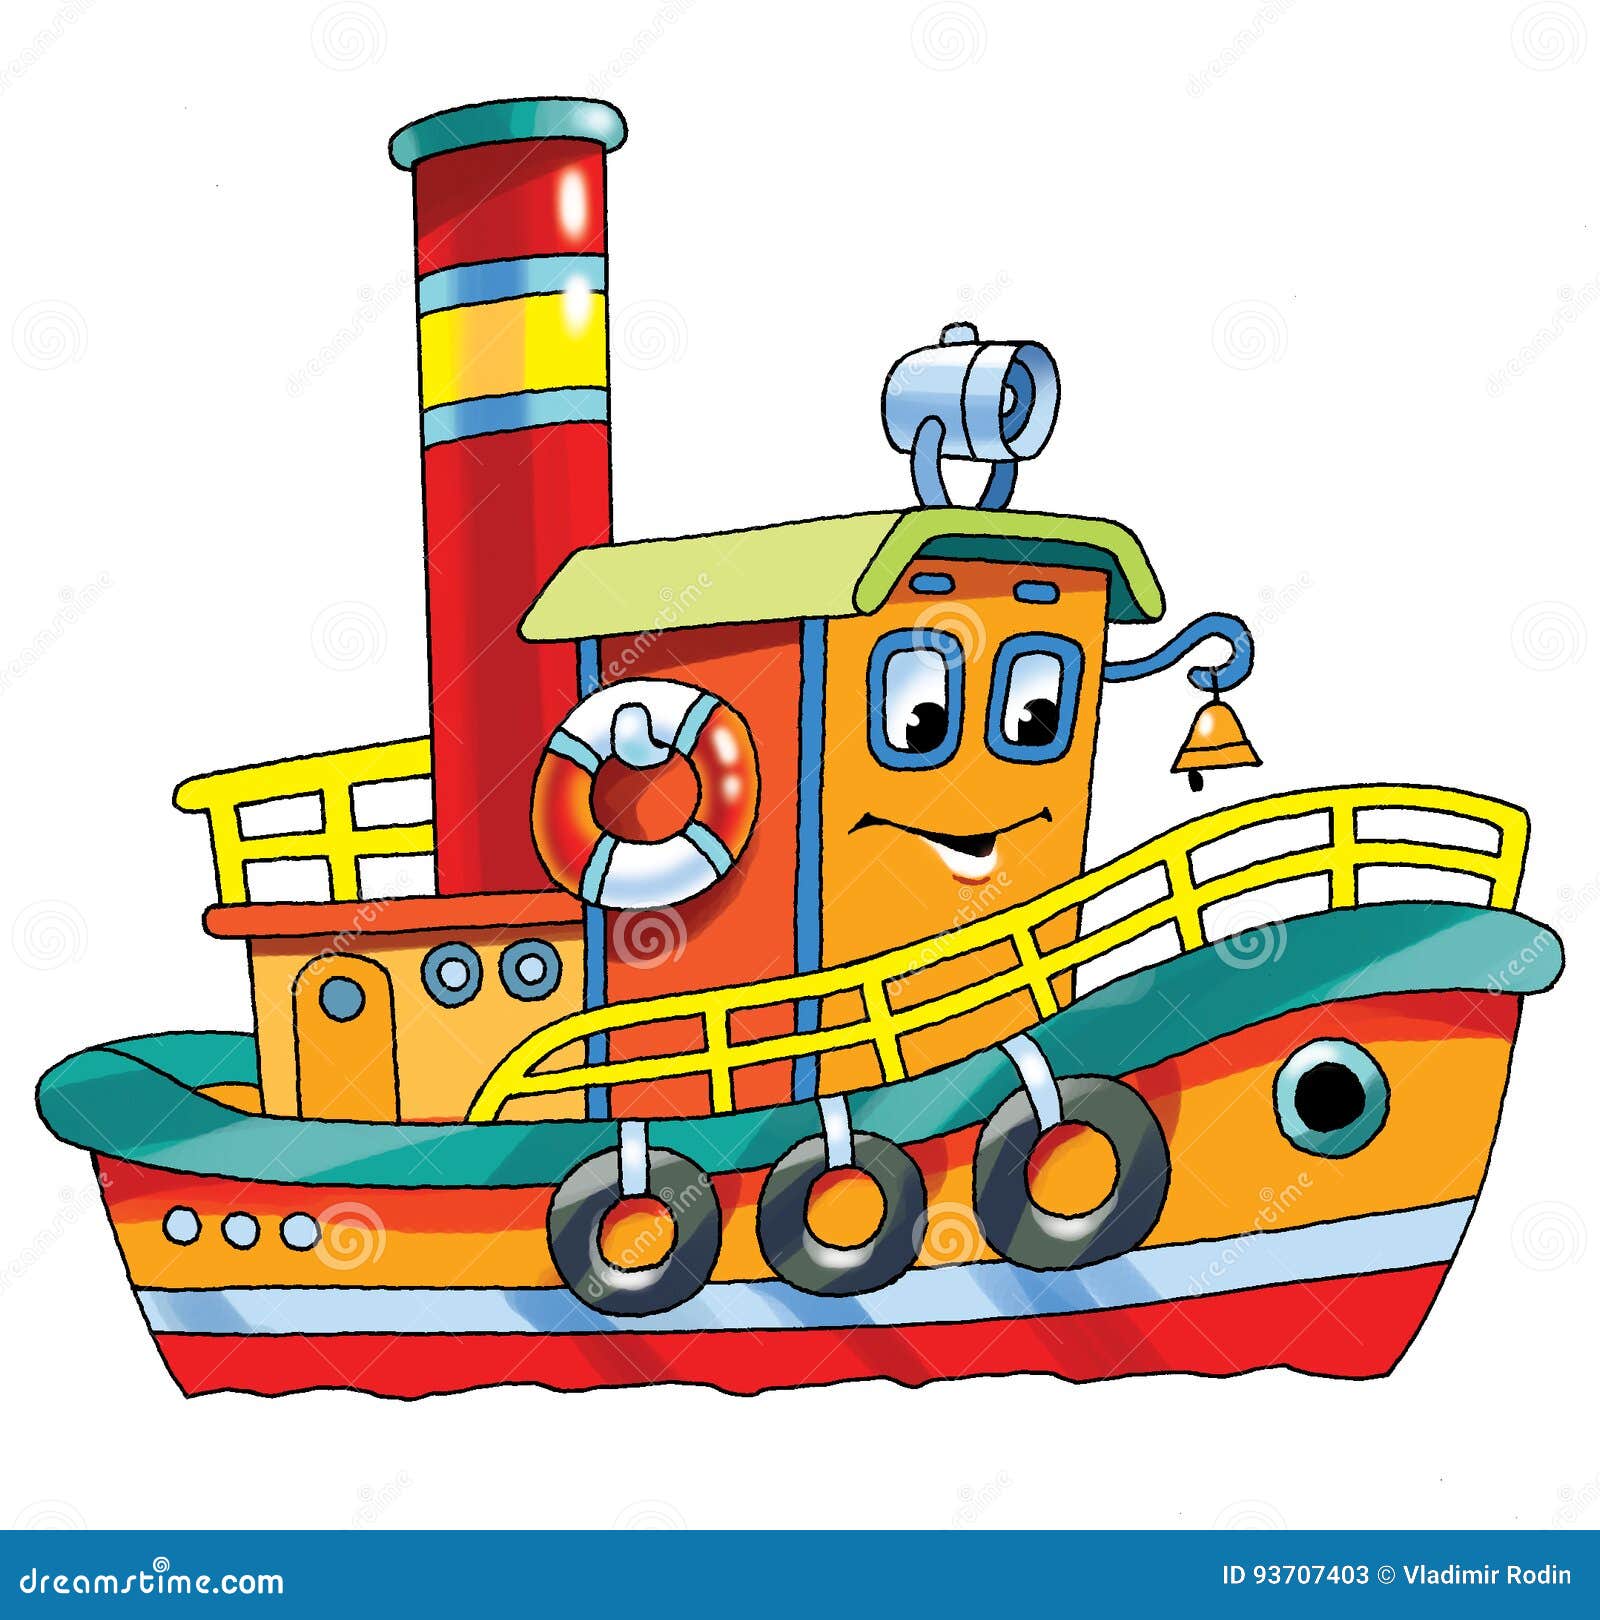 How Draw Color Boat Children Step Stock Vector (Royalty Free) 2361393241 |  Shutterstock